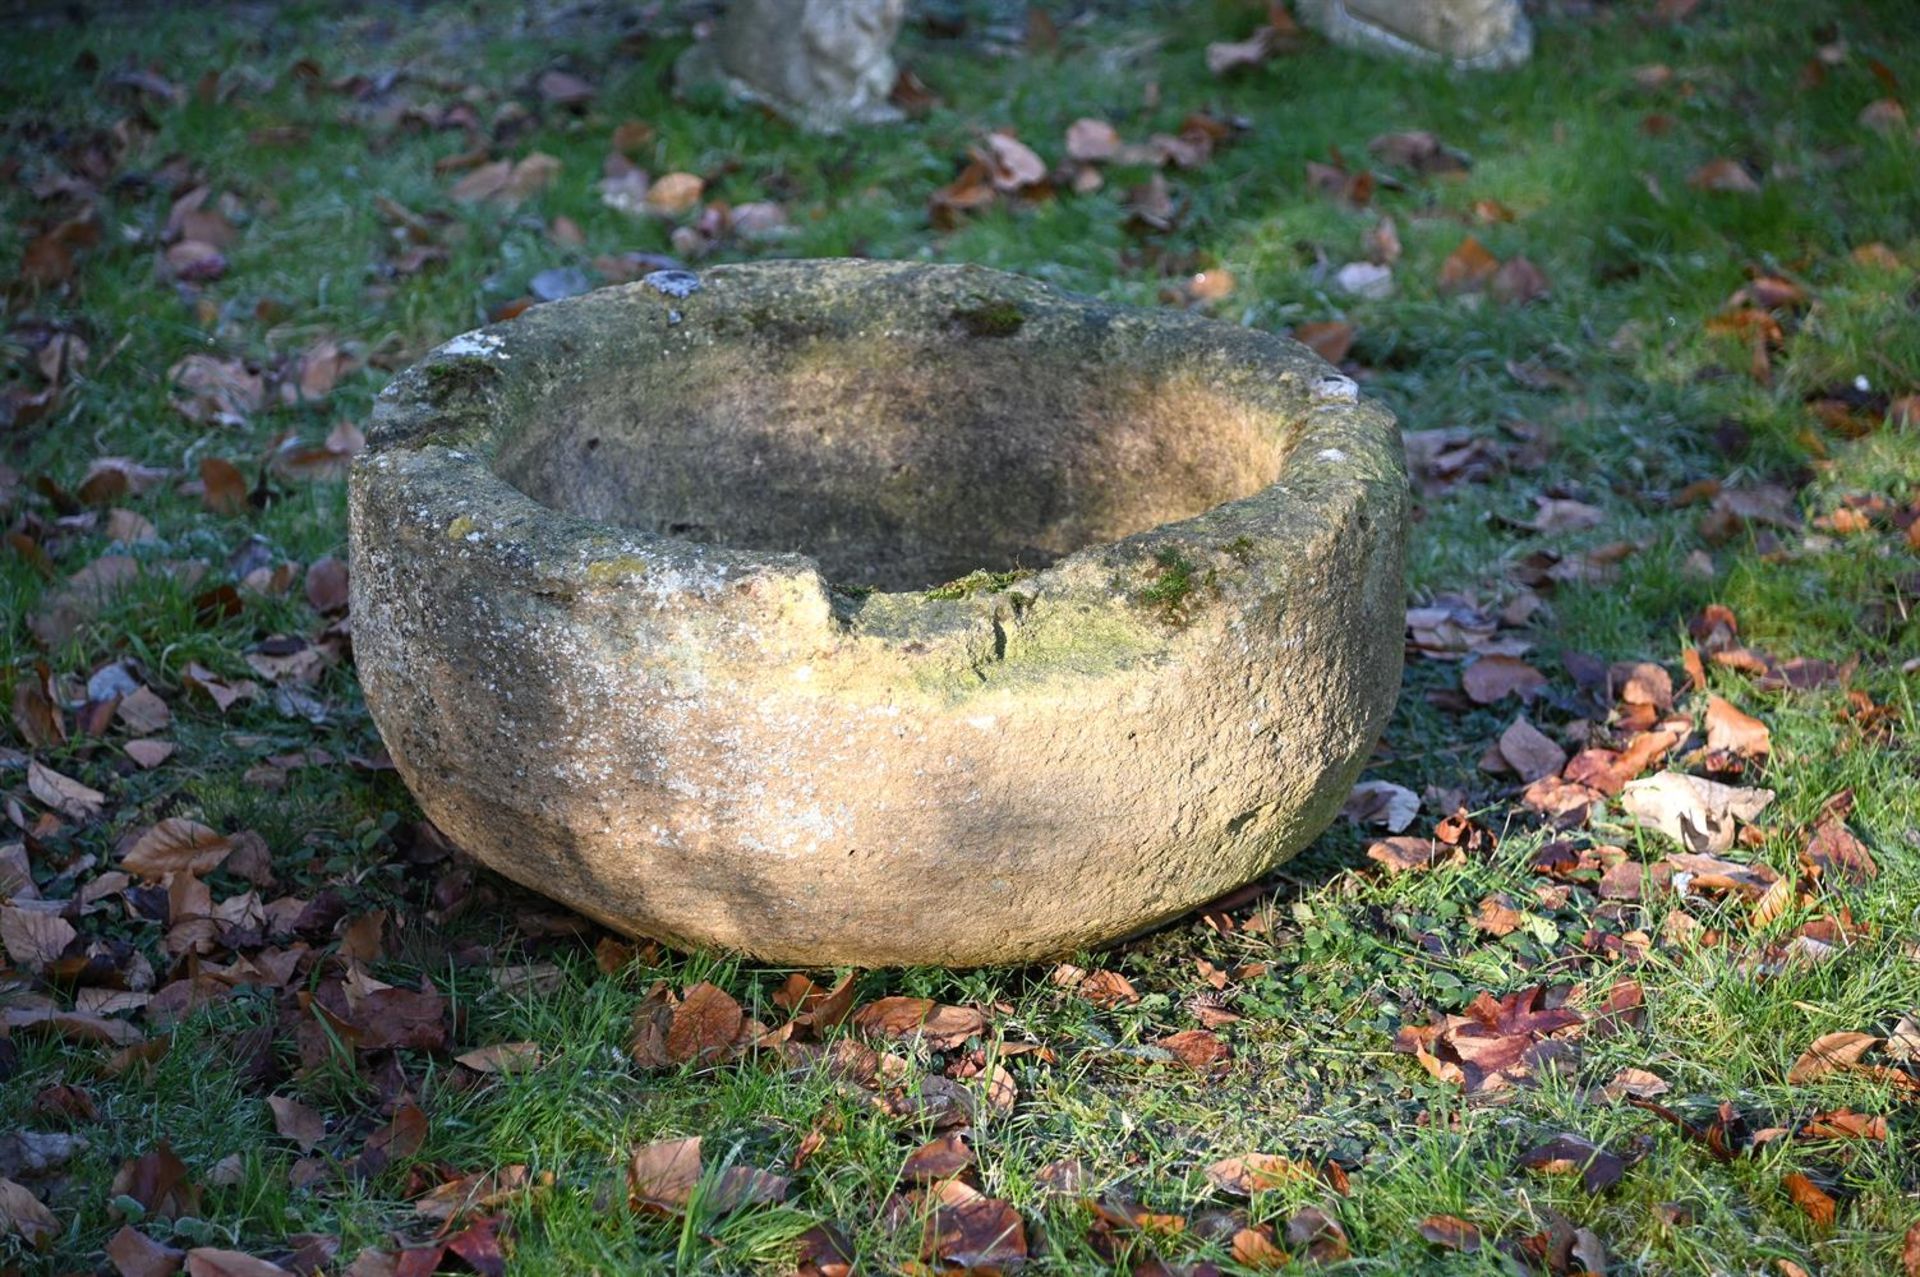 A COTSWOLD STONE ROUND PLANTER, 18TH CENTURY